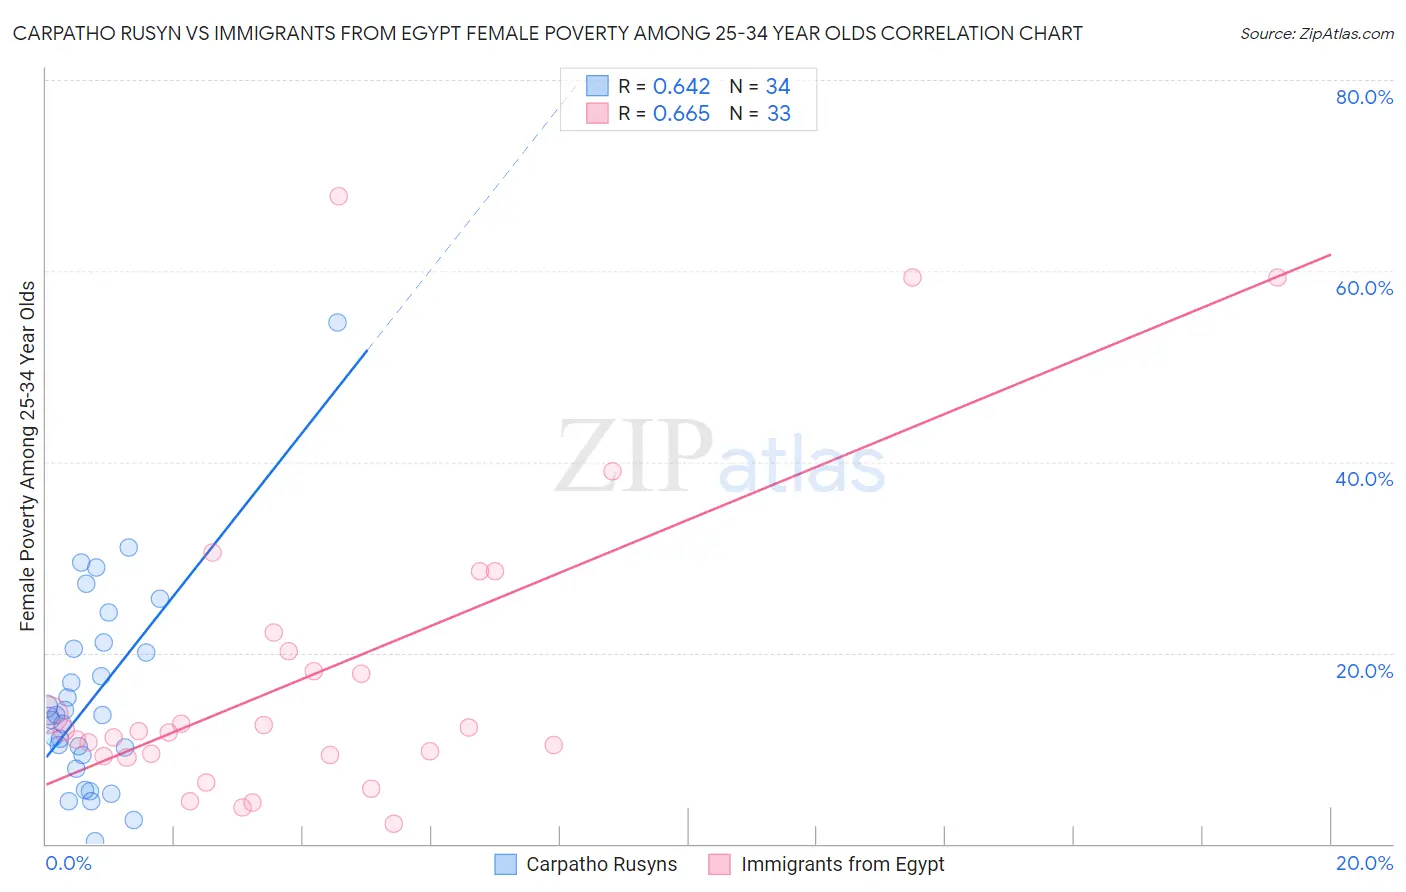 Carpatho Rusyn vs Immigrants from Egypt Female Poverty Among 25-34 Year Olds